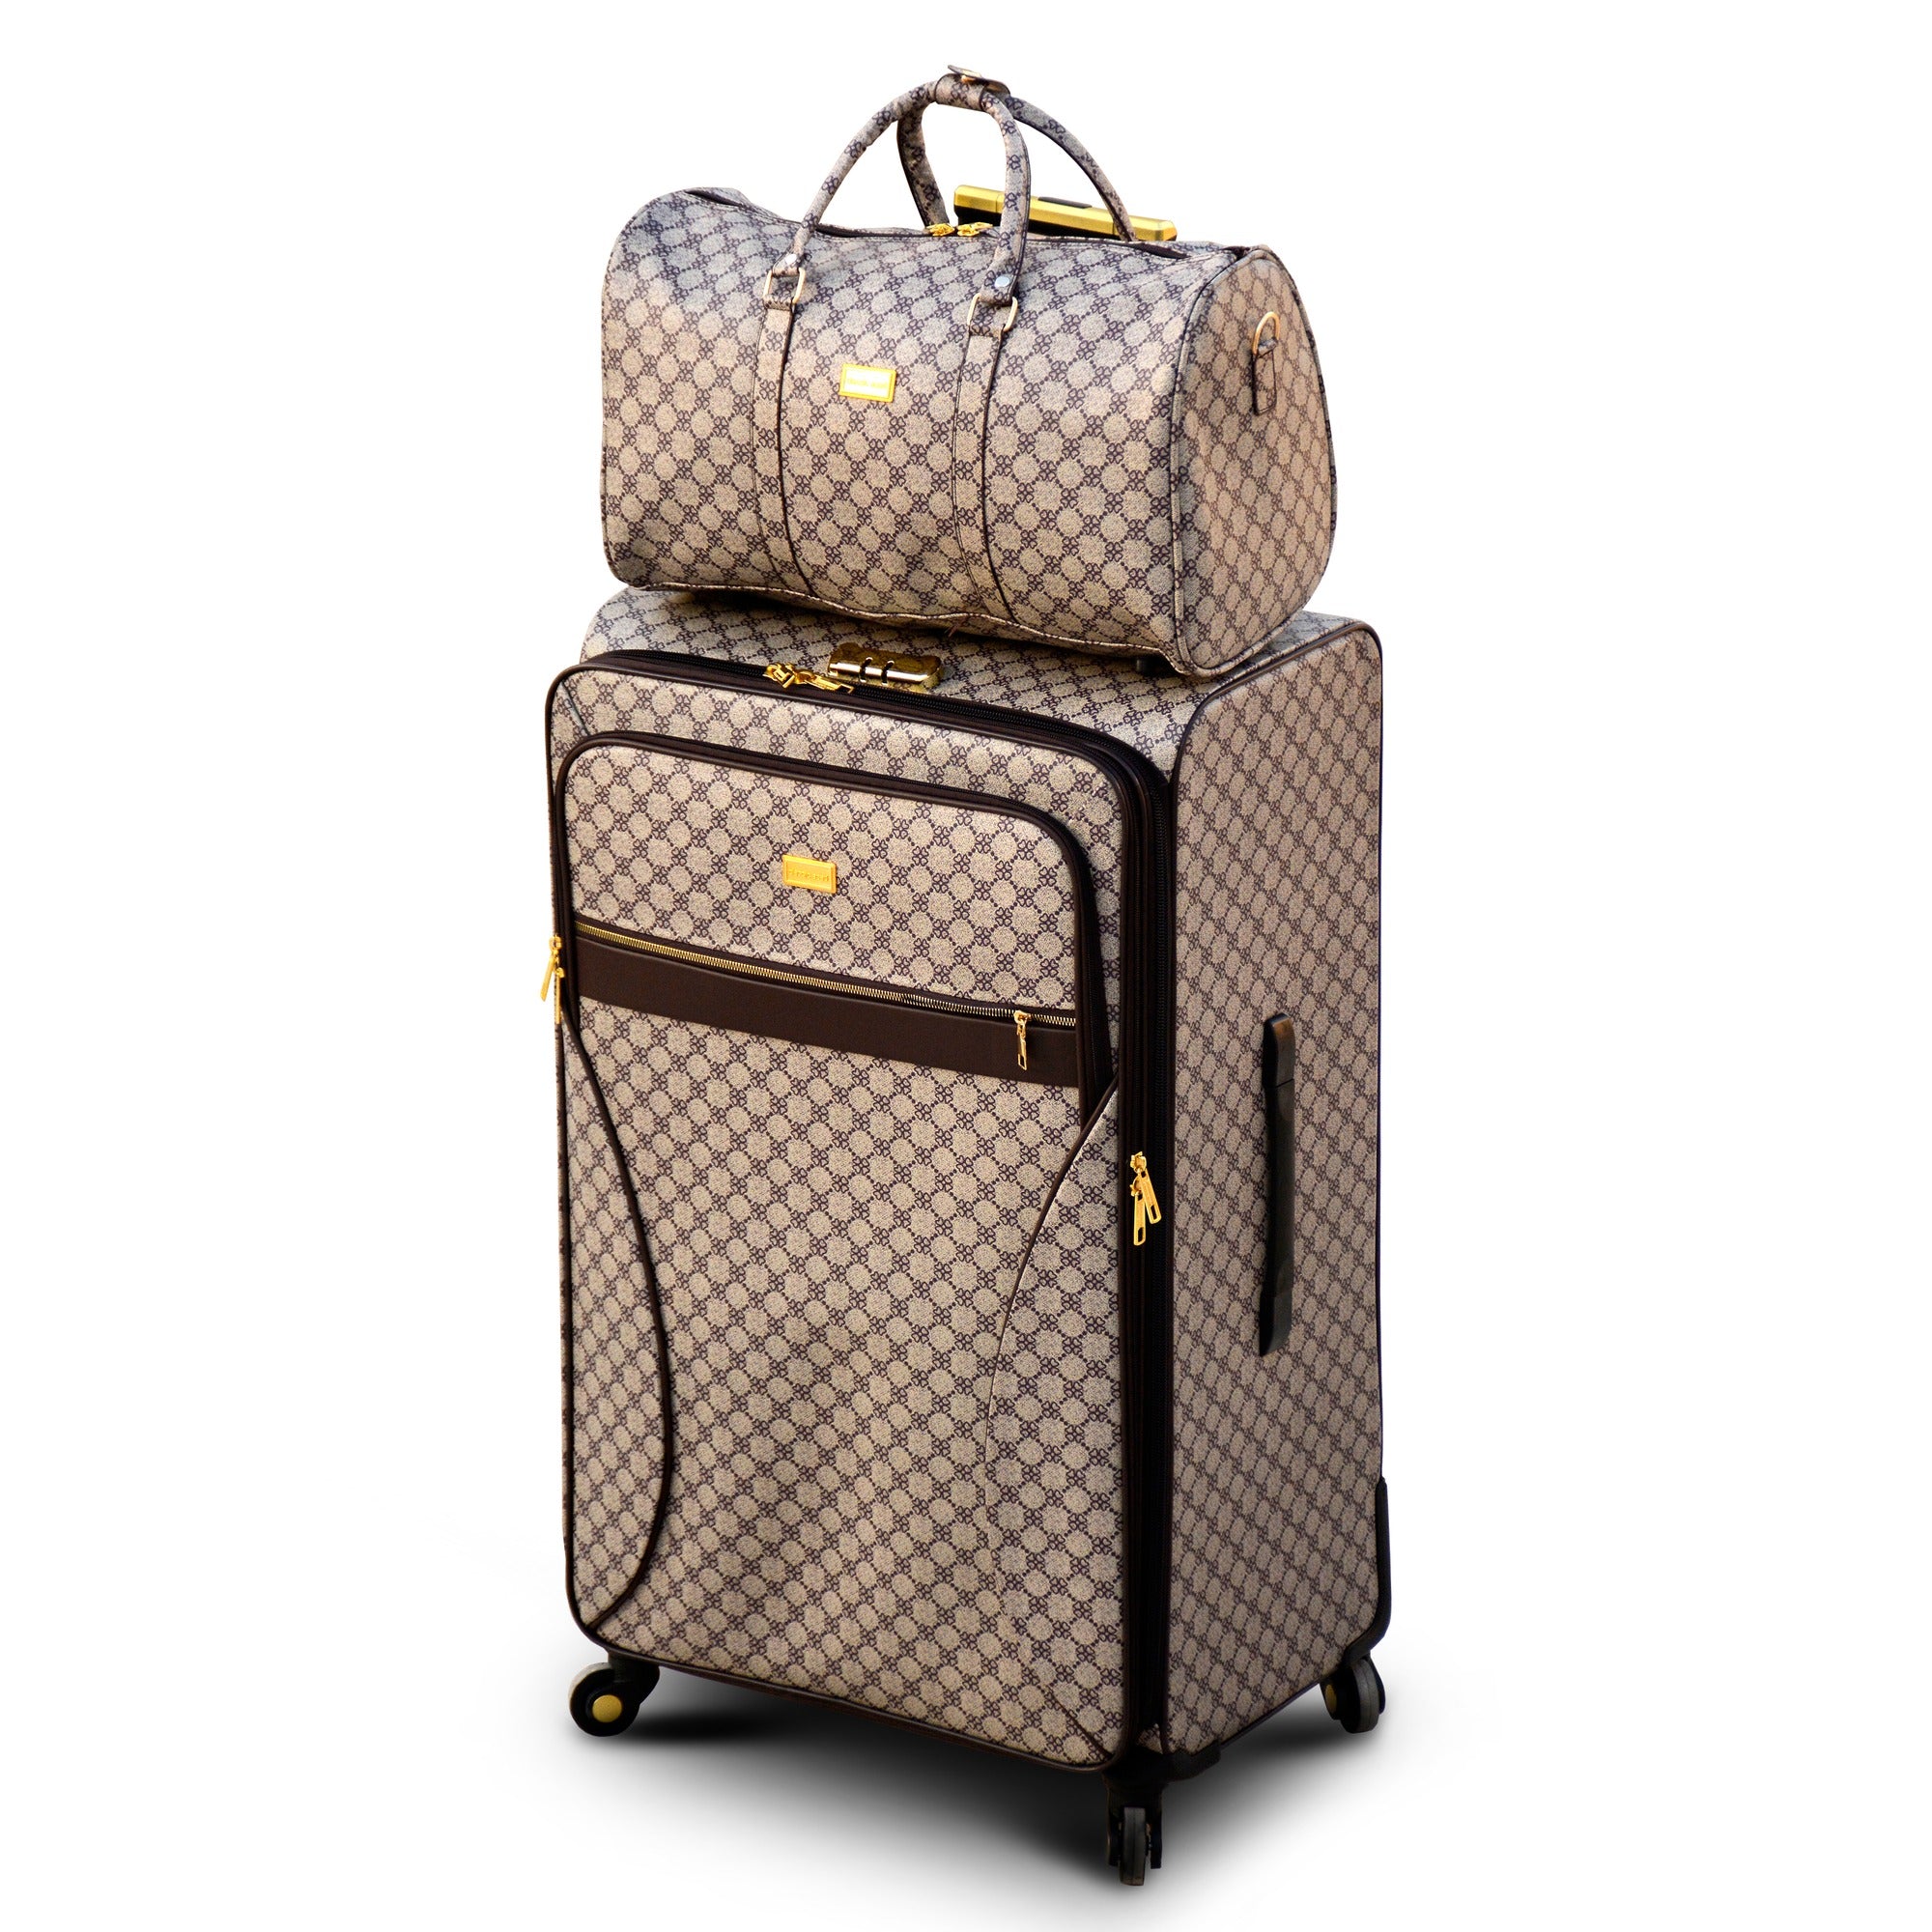 4 Pcs Set 7" 20" 24" 28 Inches VL PU Leather Material Luggage | Soft shell Four Wheel Trolley Bag